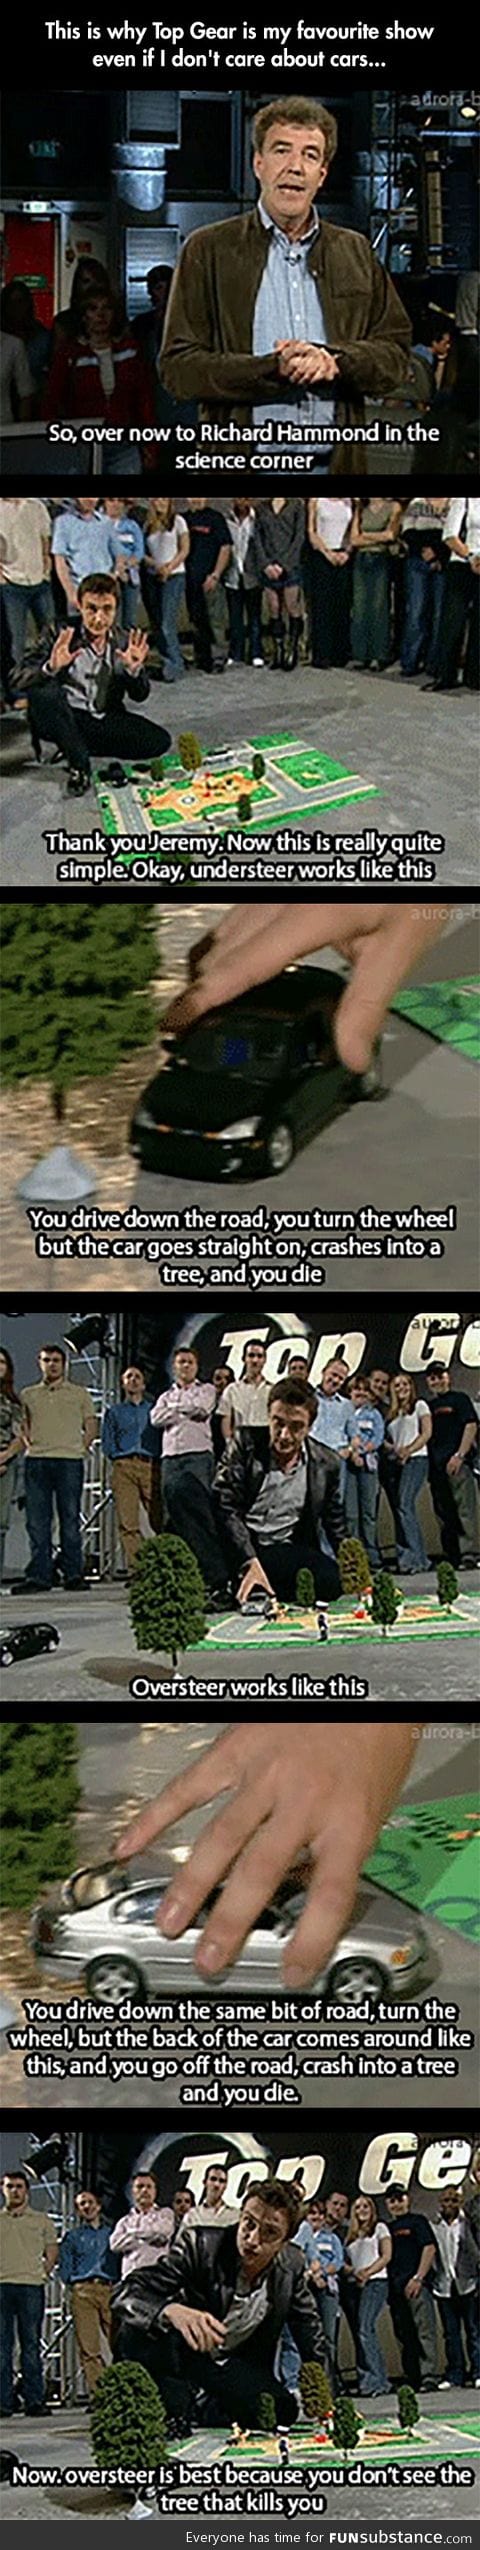 Why Top Gear a great show